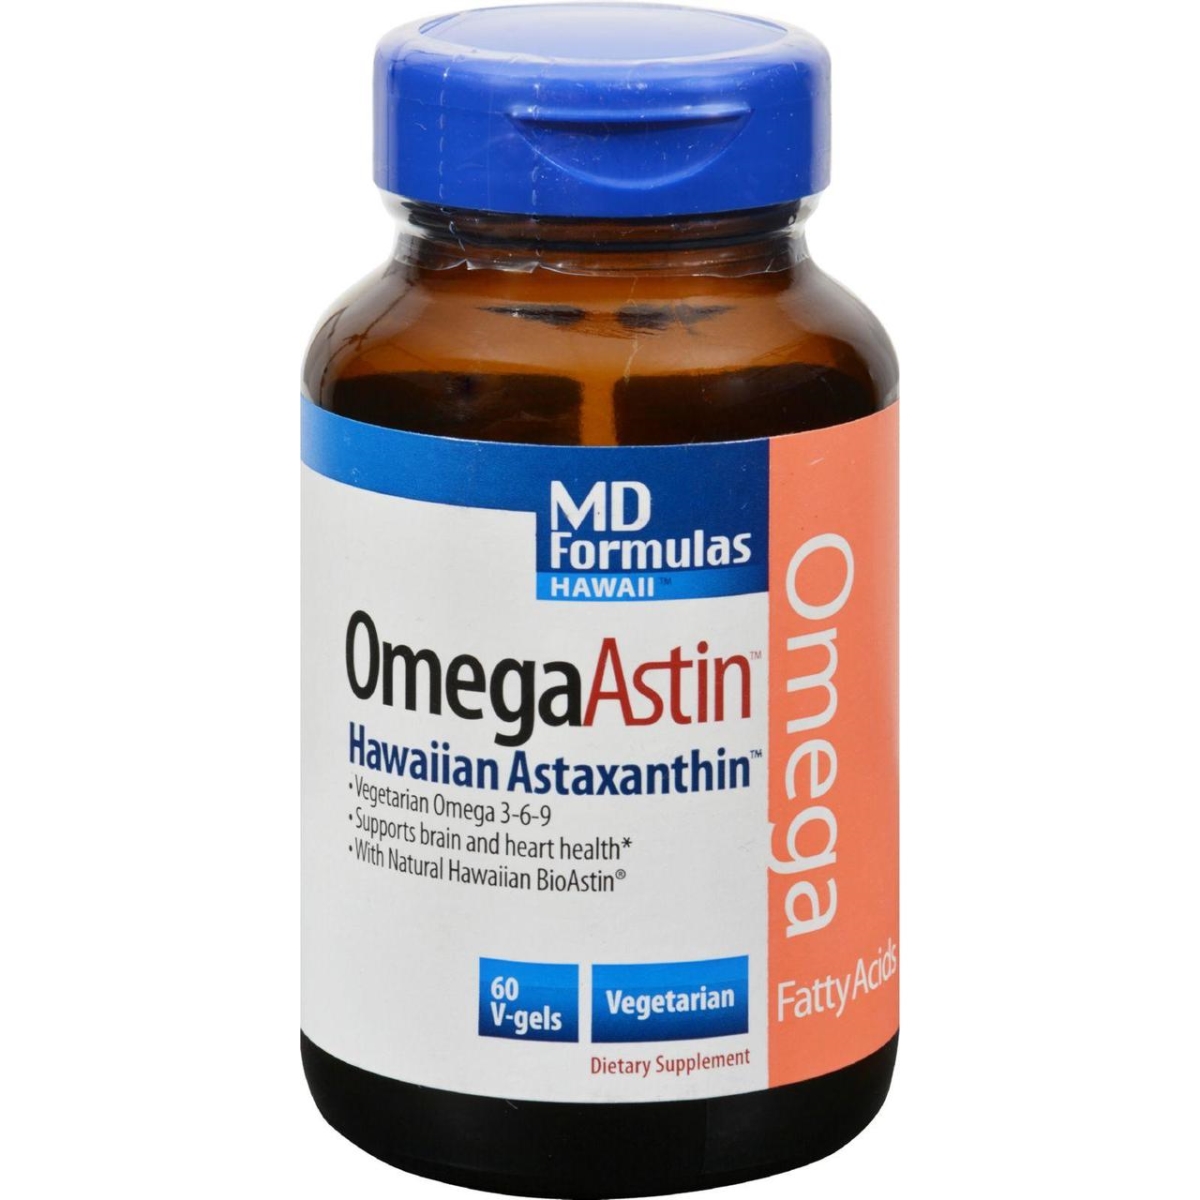 Hg0232850 Omegaastin With Pure Natural Astaxanthin - 60 Vegetarian Softgels